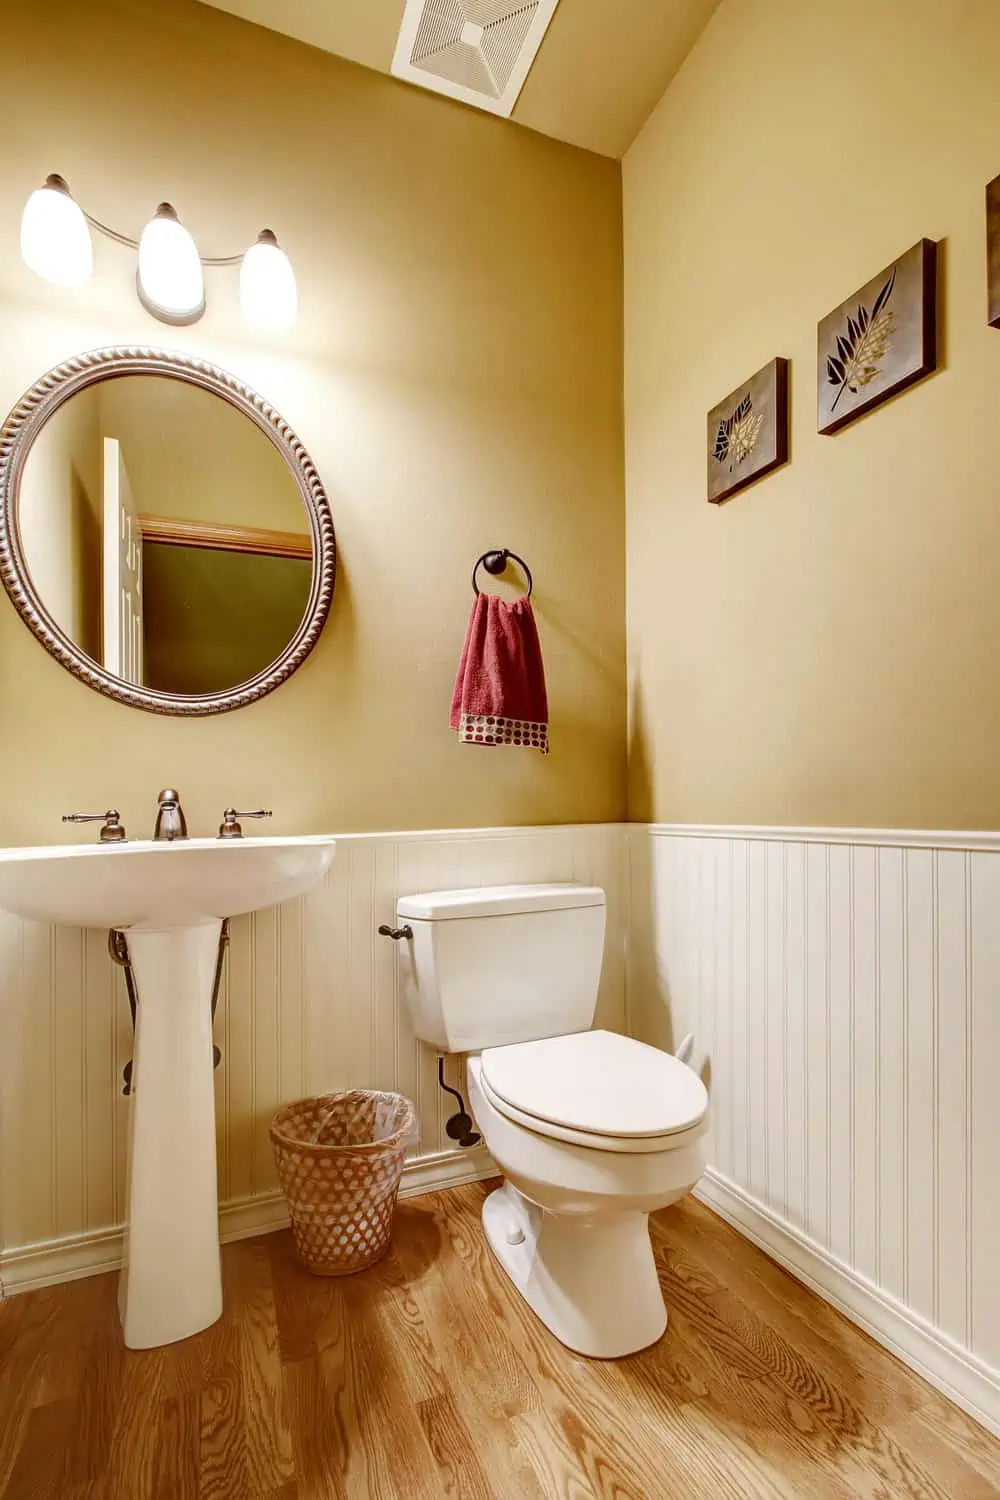 Small bathroom with white washbasin stand and toilet. Beige wall with white trim